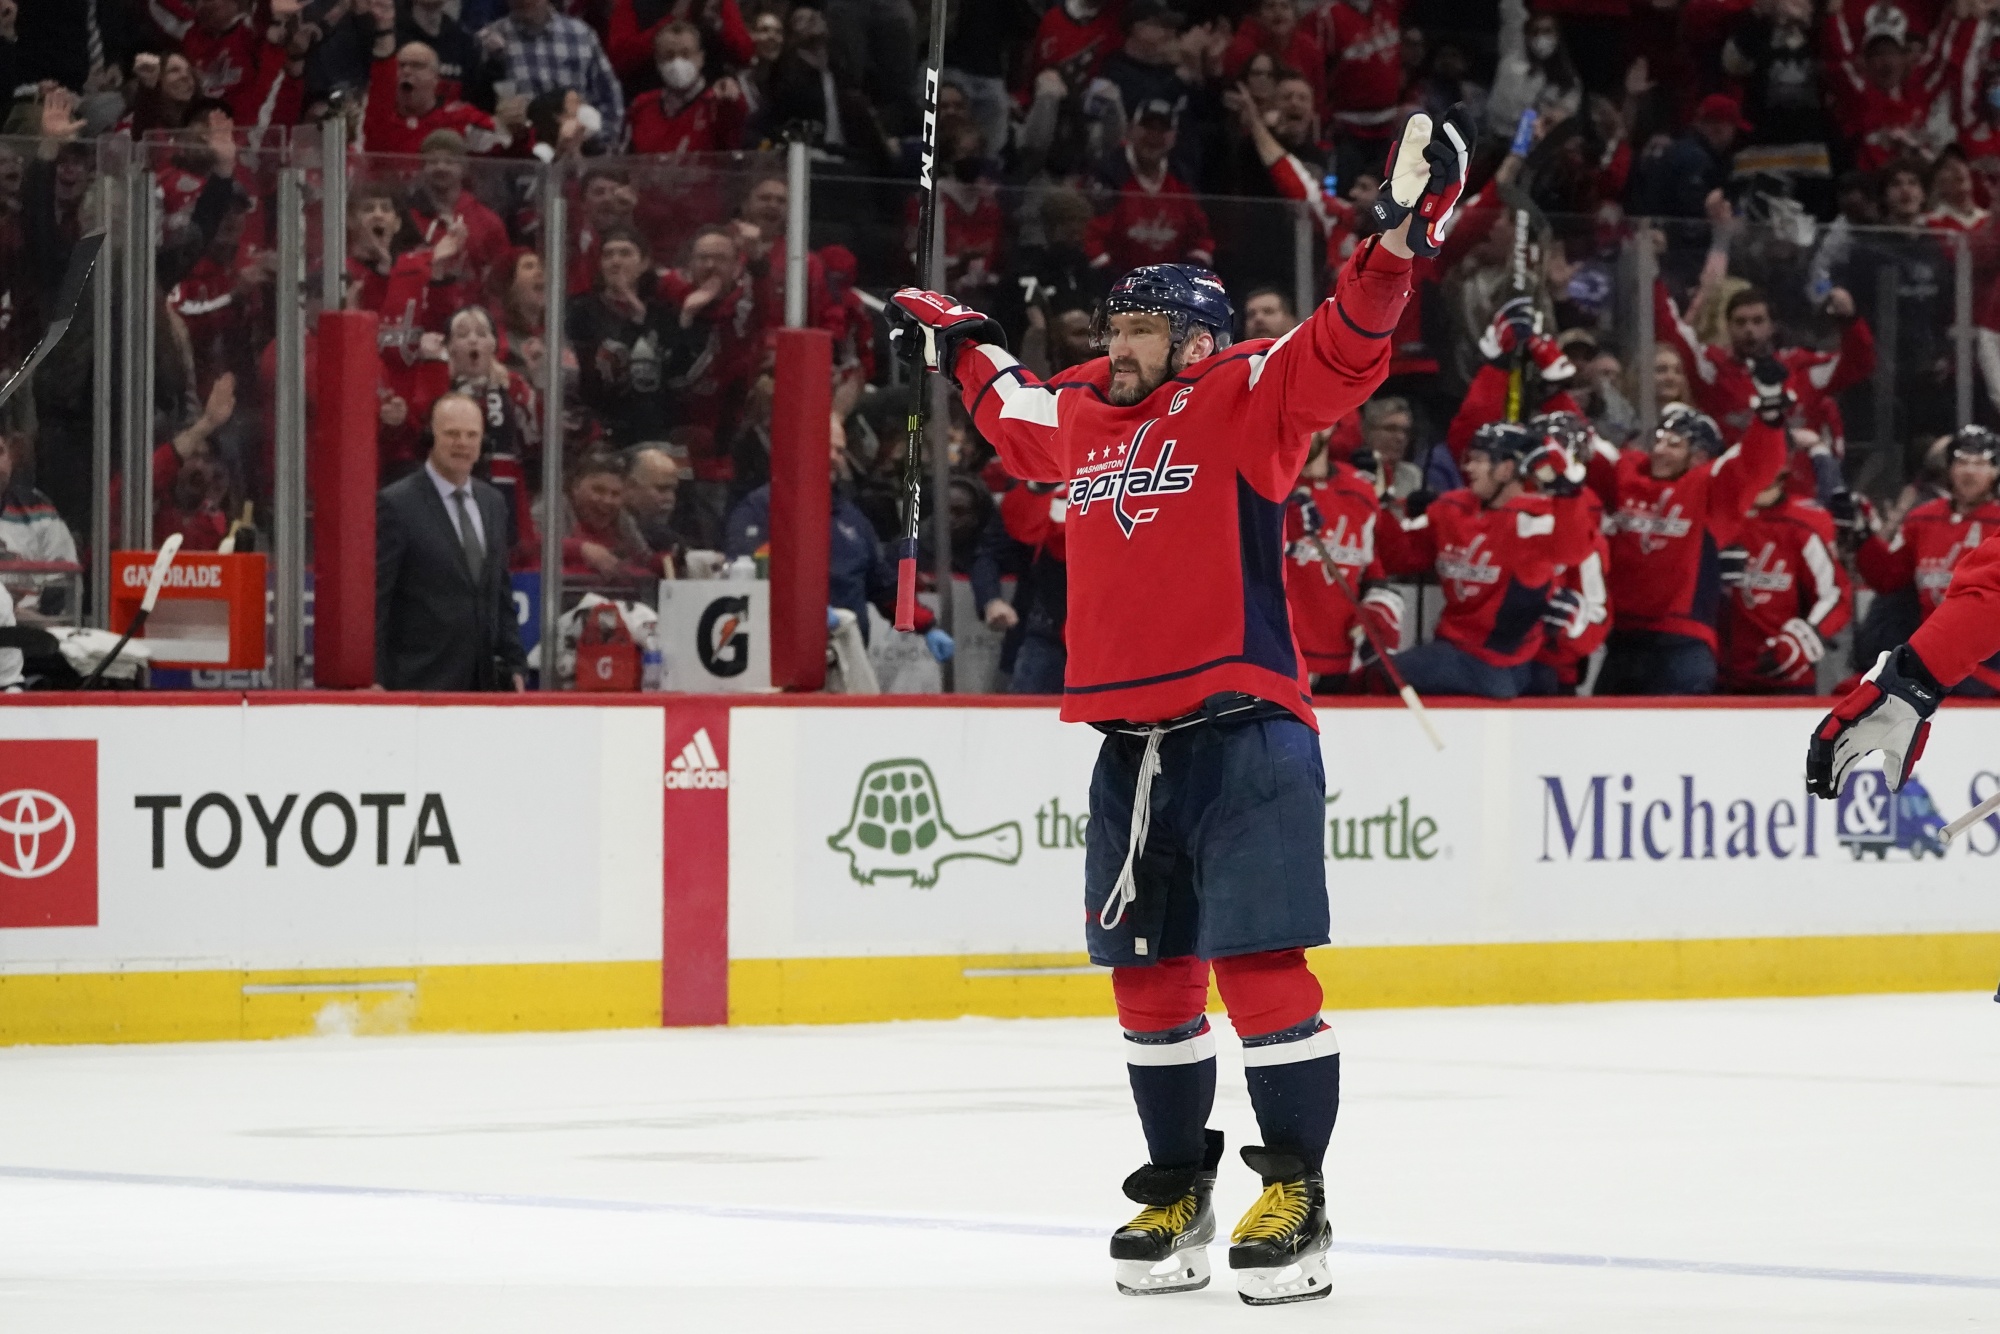 How an improved Capitals power play will help Ovechkin chase